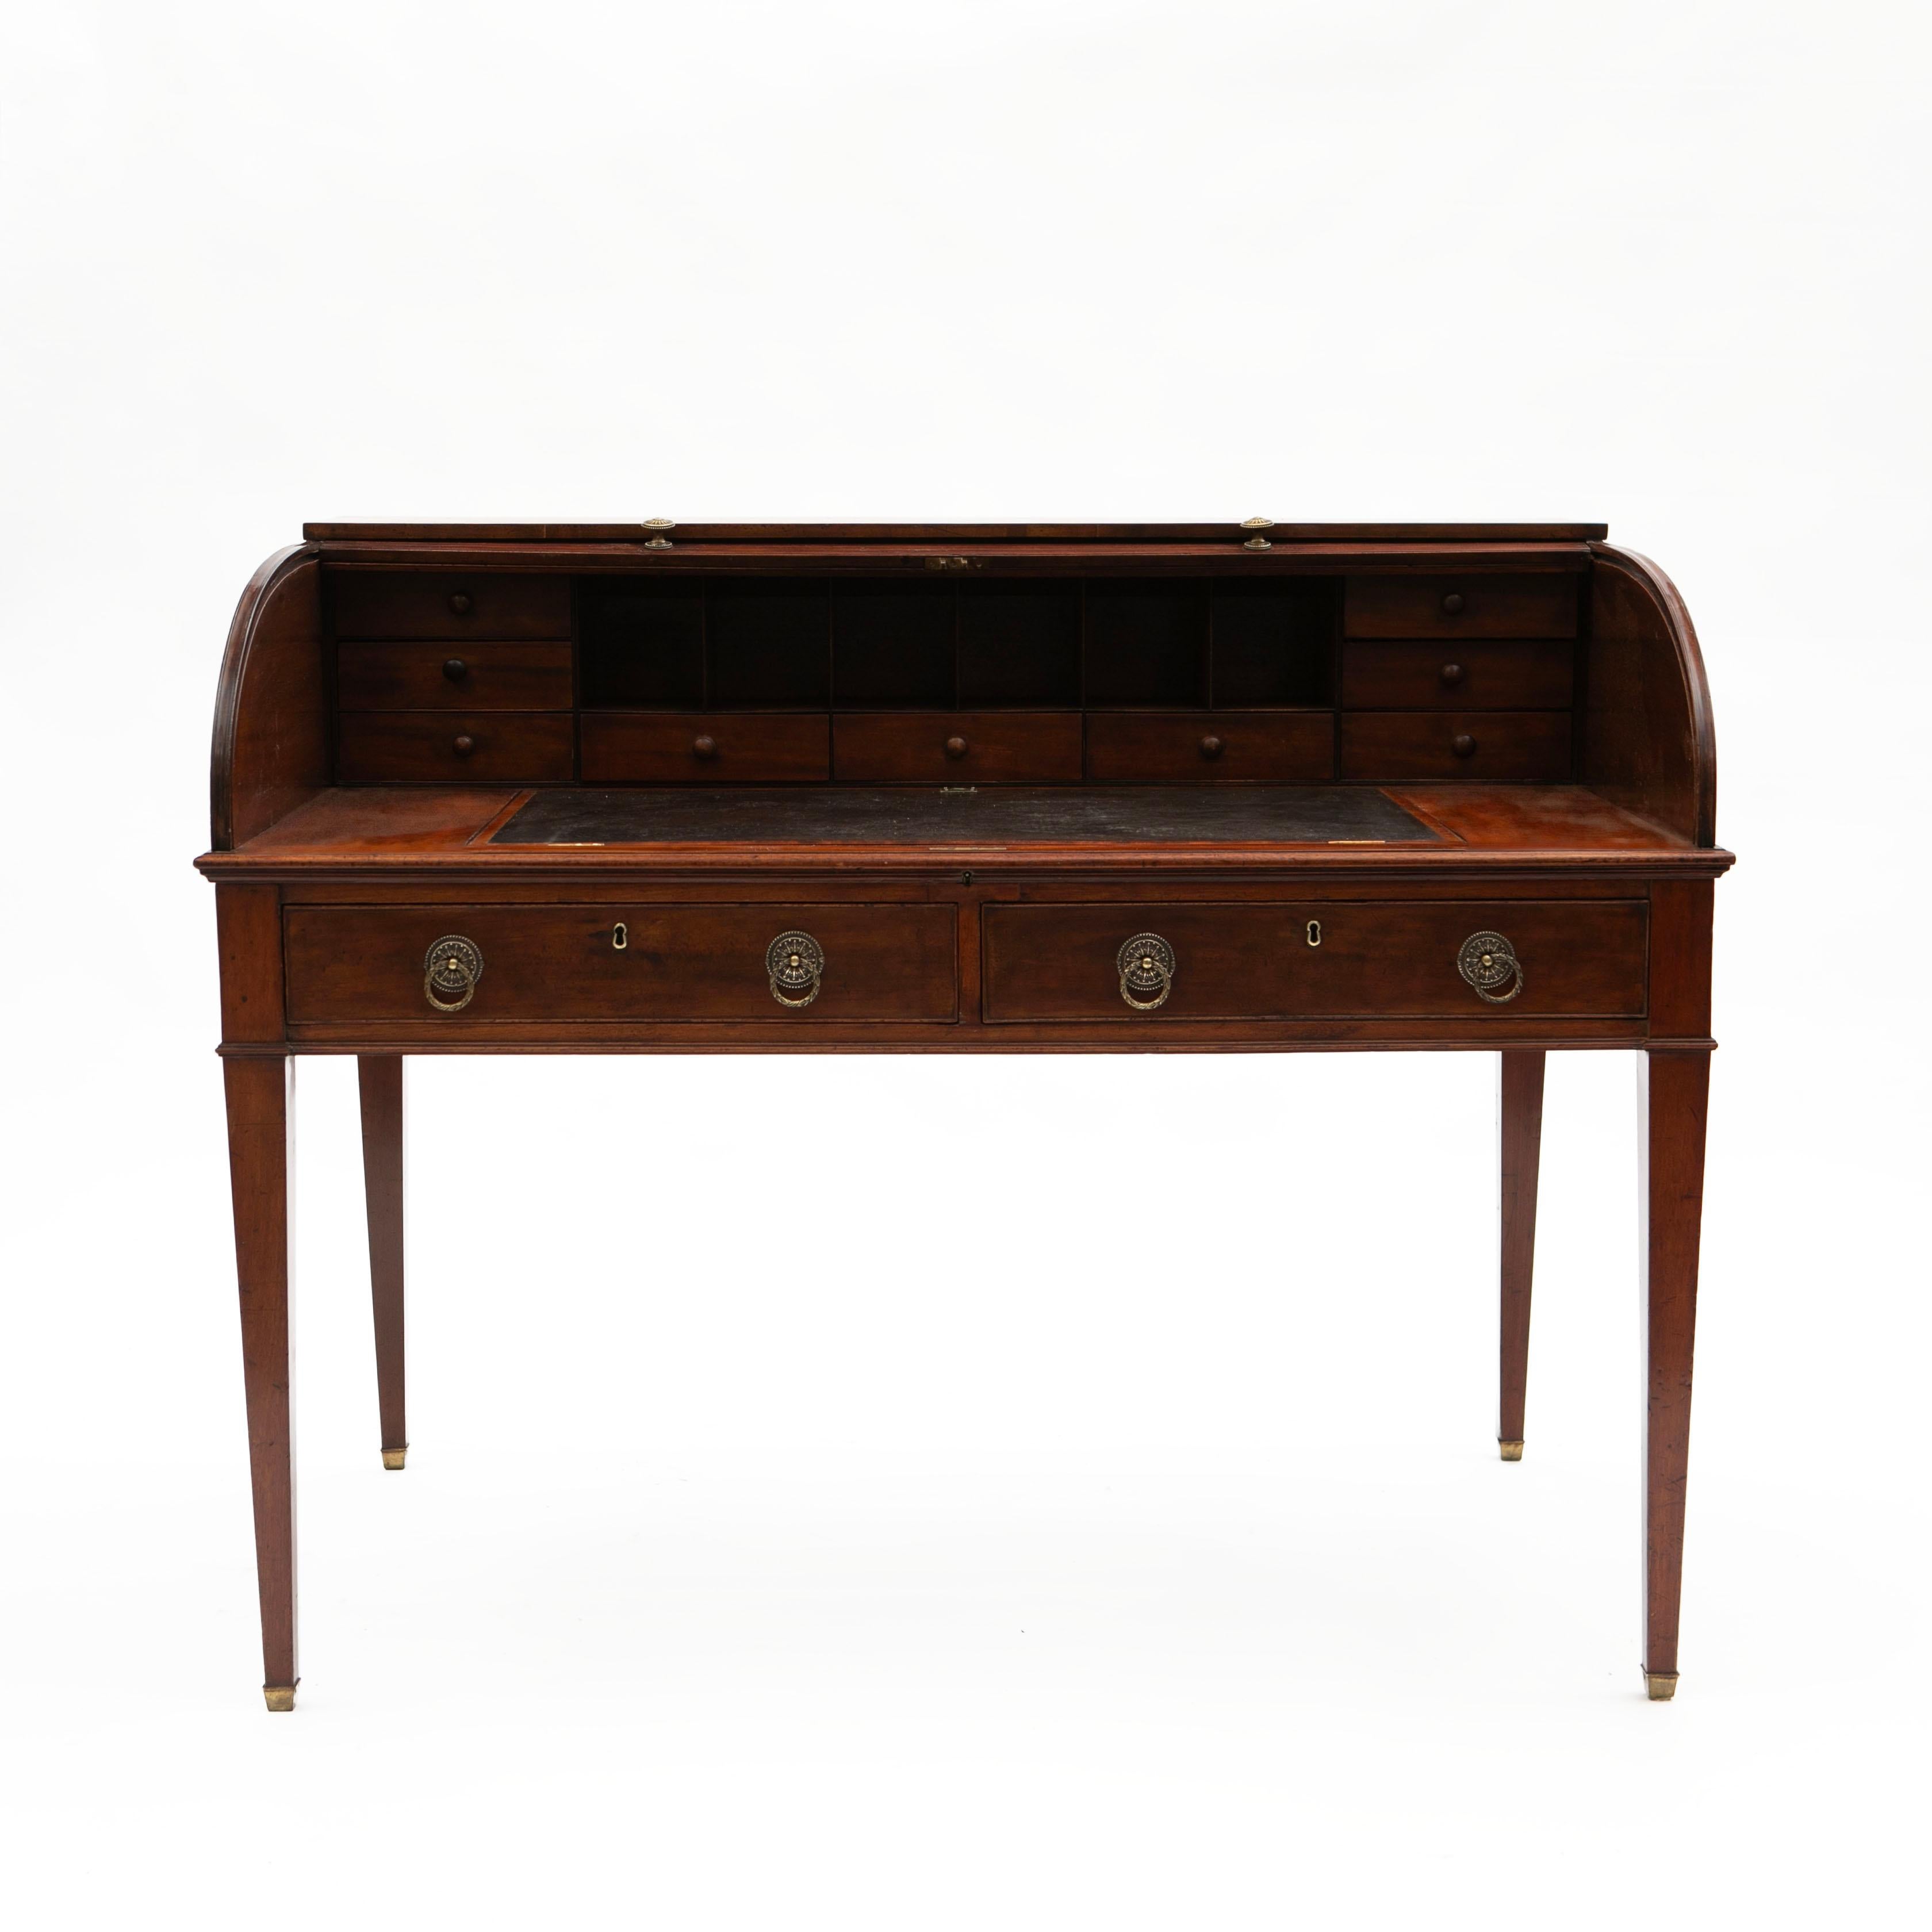 Free Standing Mahogany English Regency Tambour Roll Top Writing Desk In Good Condition For Sale In Kastrup, DK